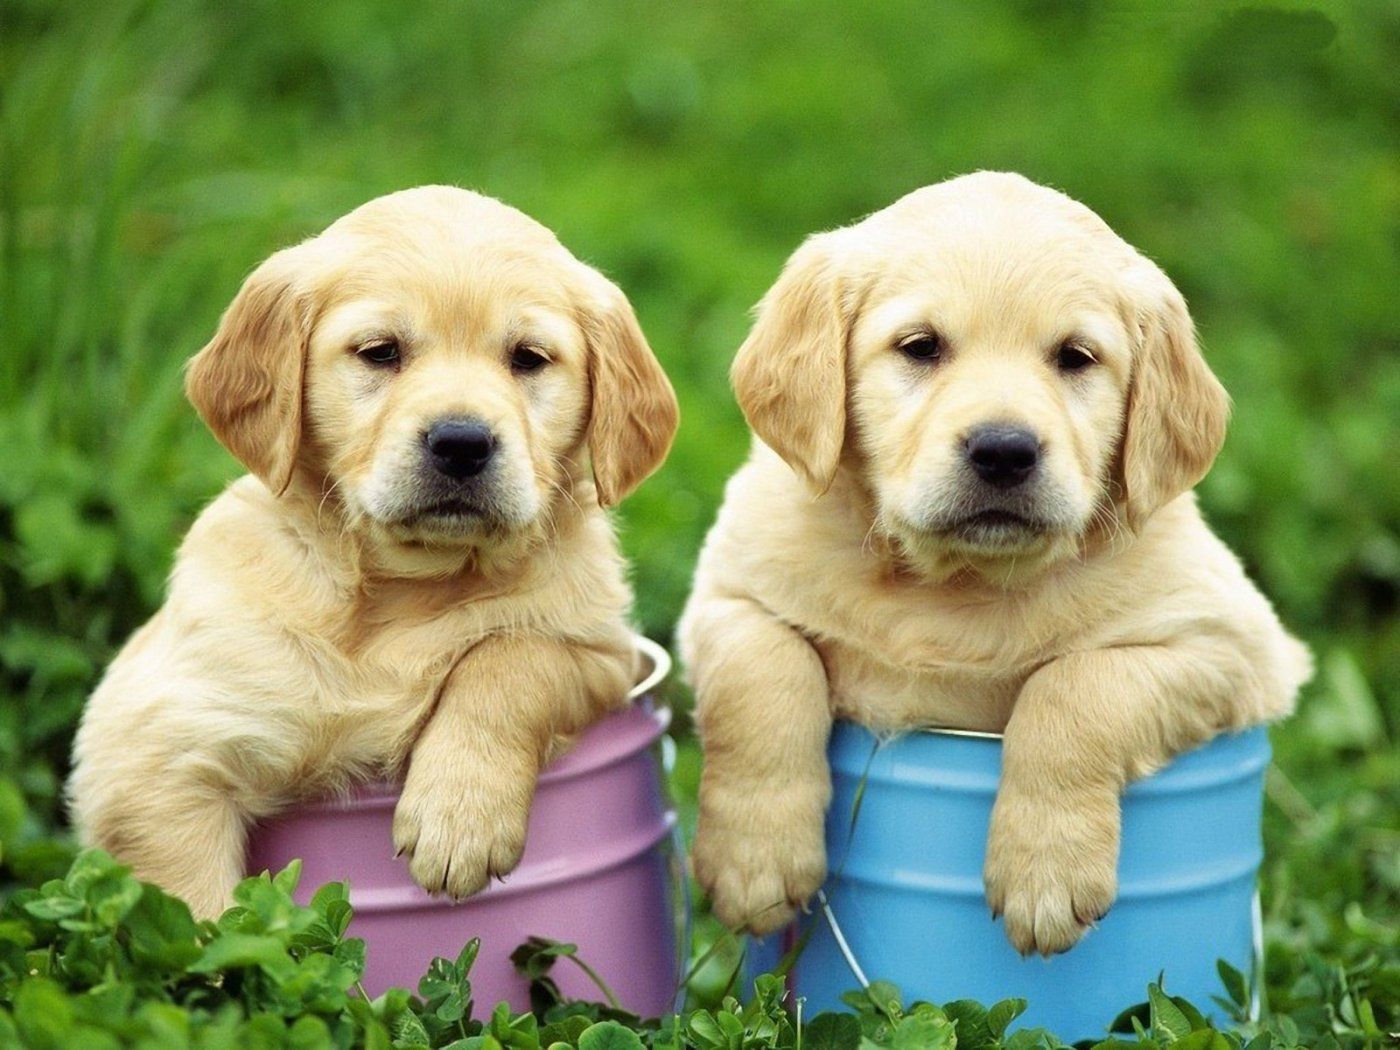 Two cute Golden Retriever puppies photo and wallpaper. Beautiful